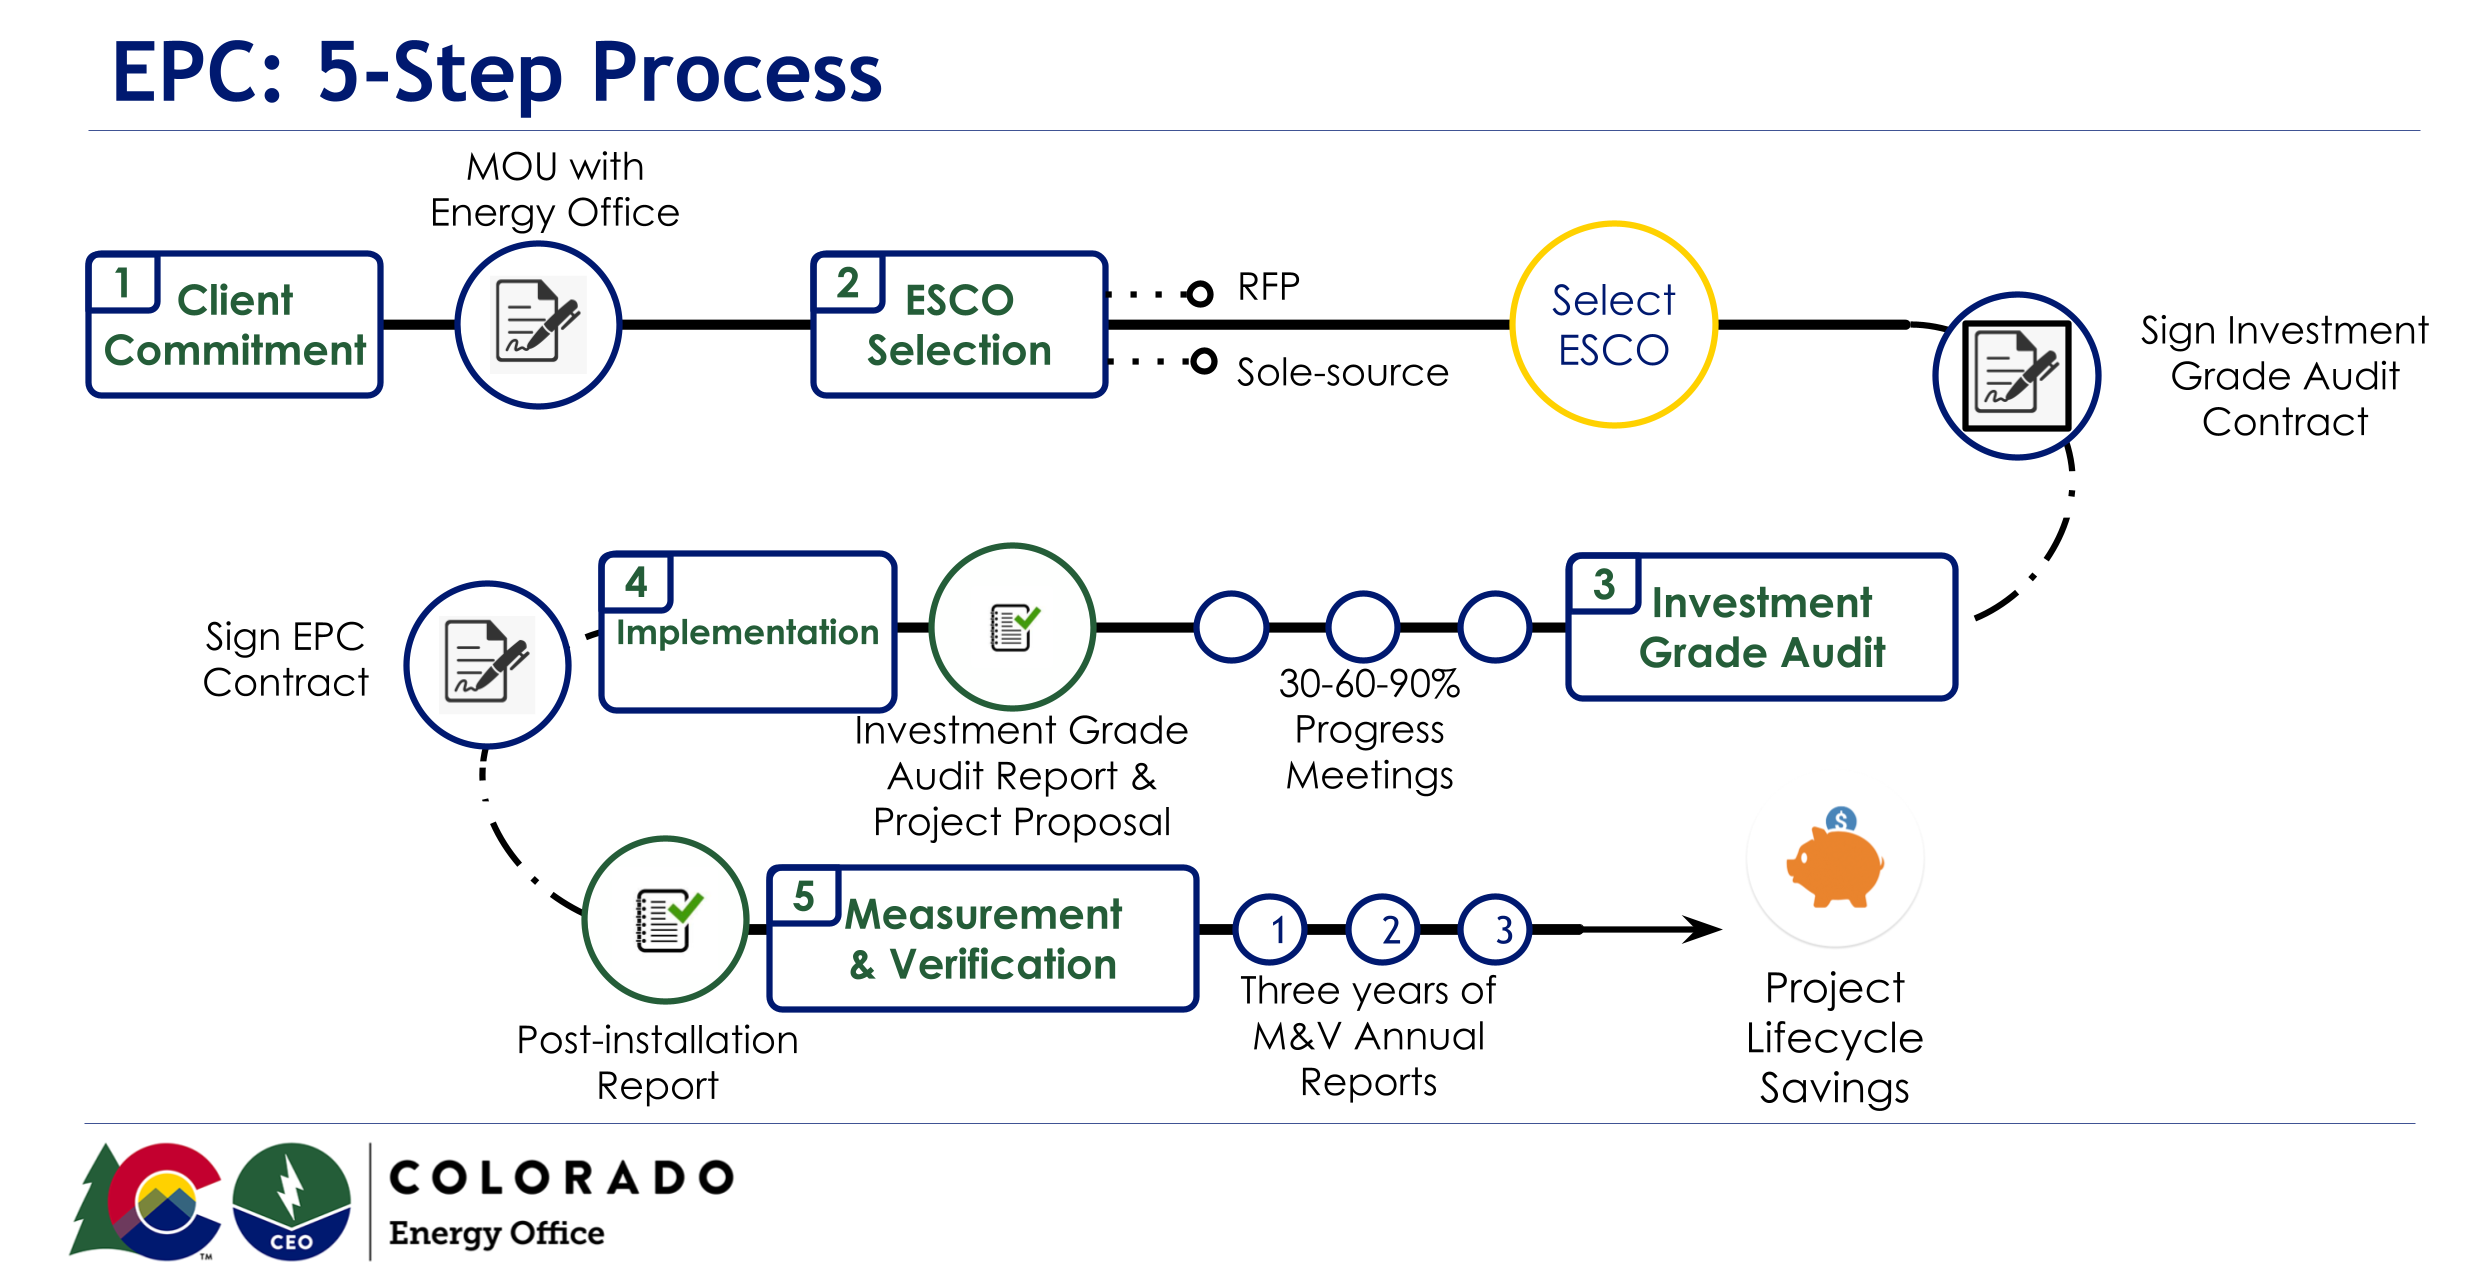 A process model outlining the steps of a complete Energy Performance Contract